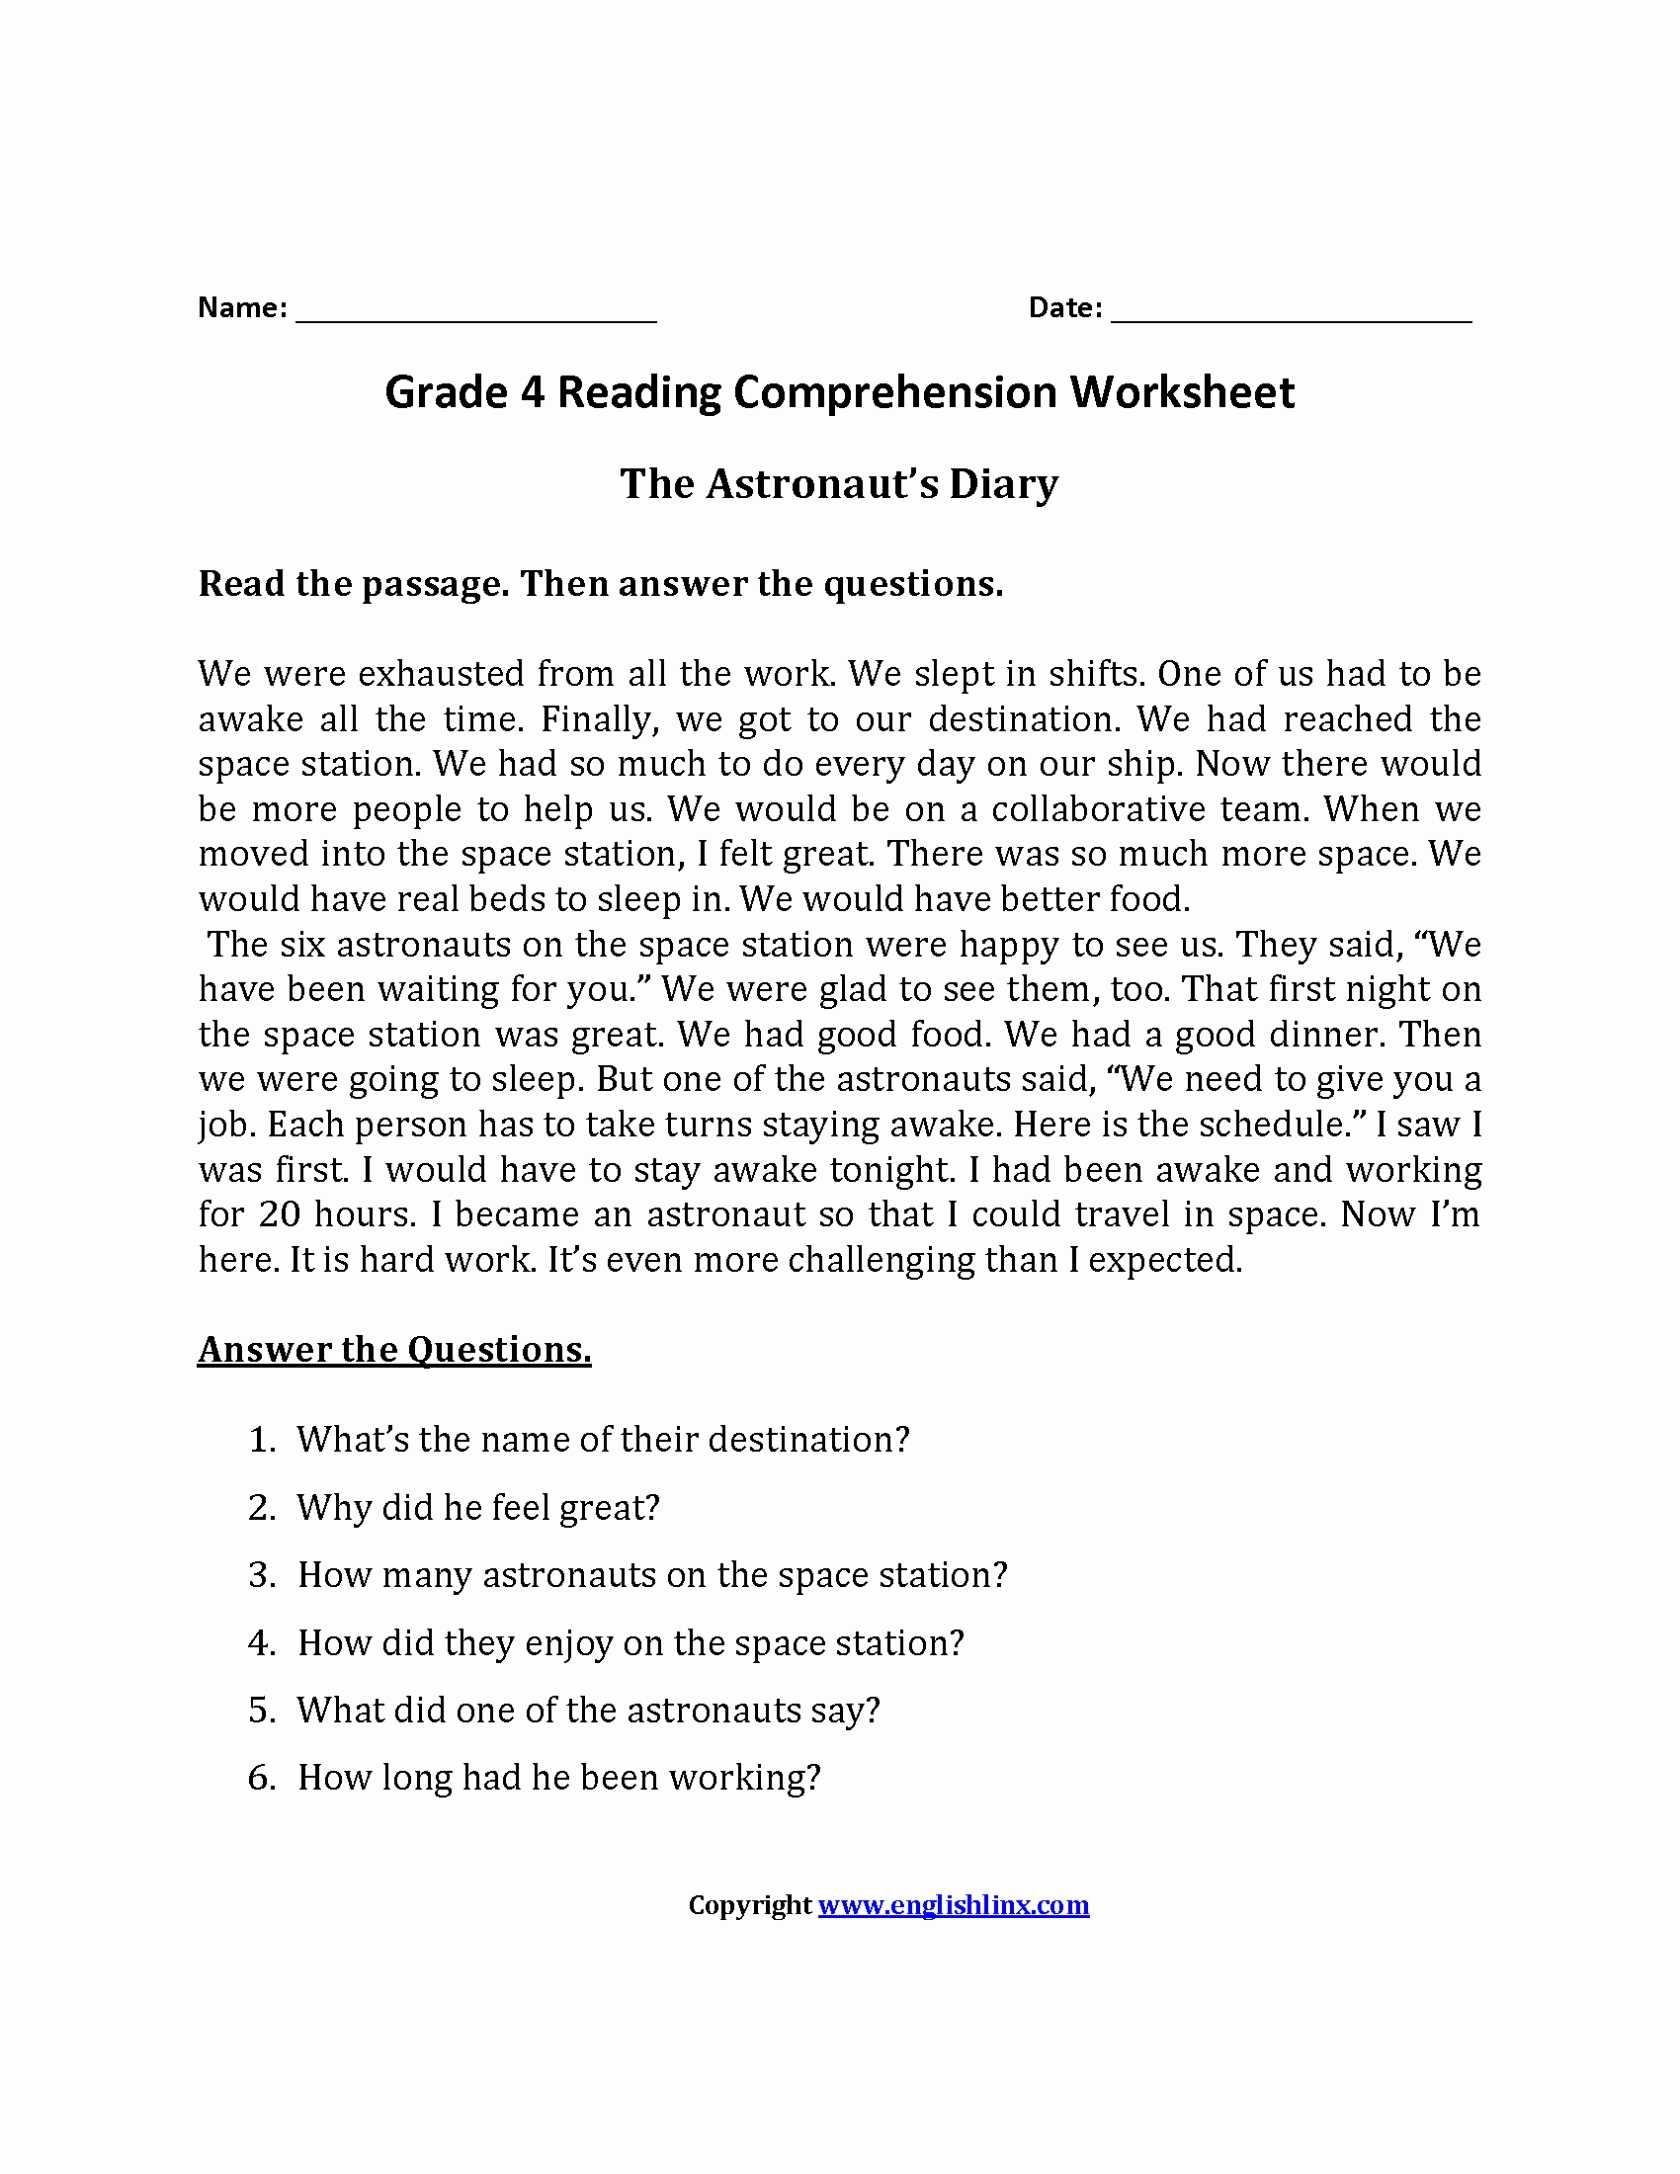 Free Reading Comprehension Worksheets for 3rd Grade Along with Reading Prehension Pdf Worksheet Image Collections Worksheet